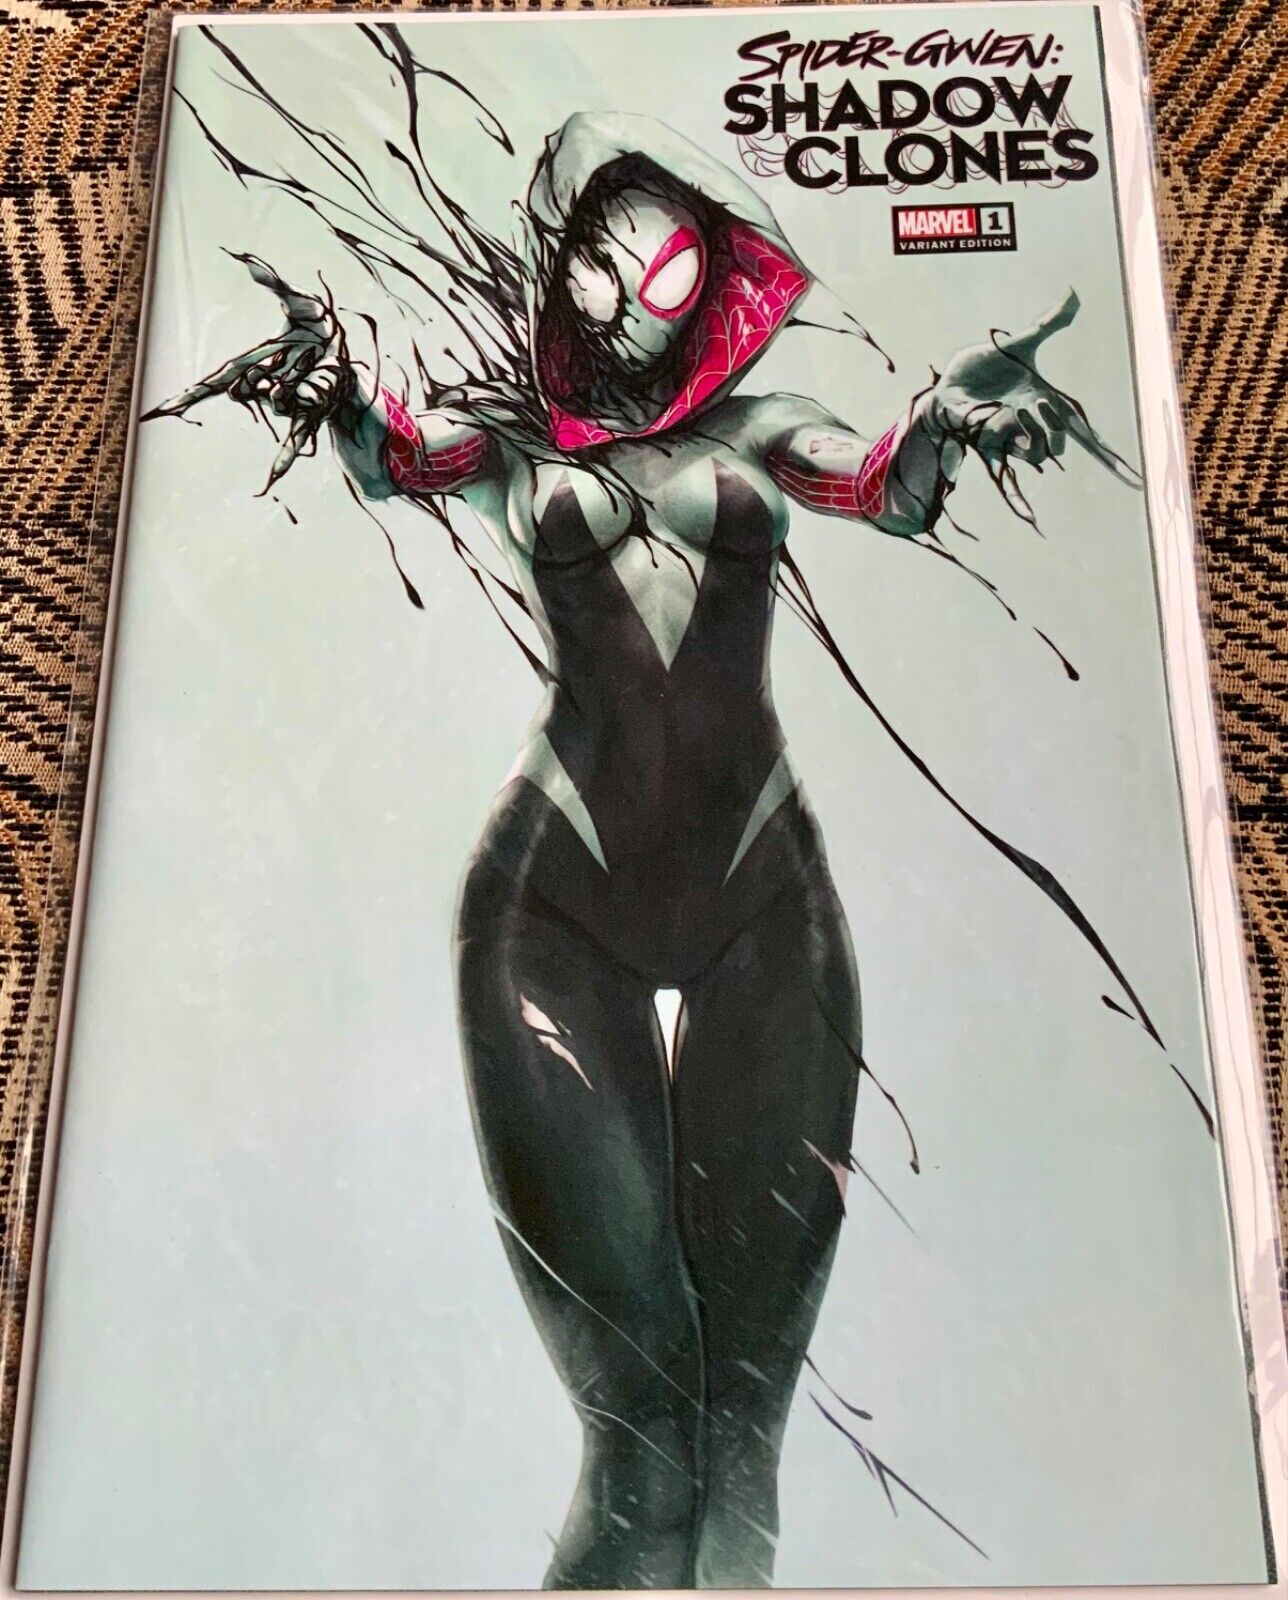 Spider Gwen Shadow Clones #1 Ivan Tao, Limited 701/1000 with Numbered COA, NM+